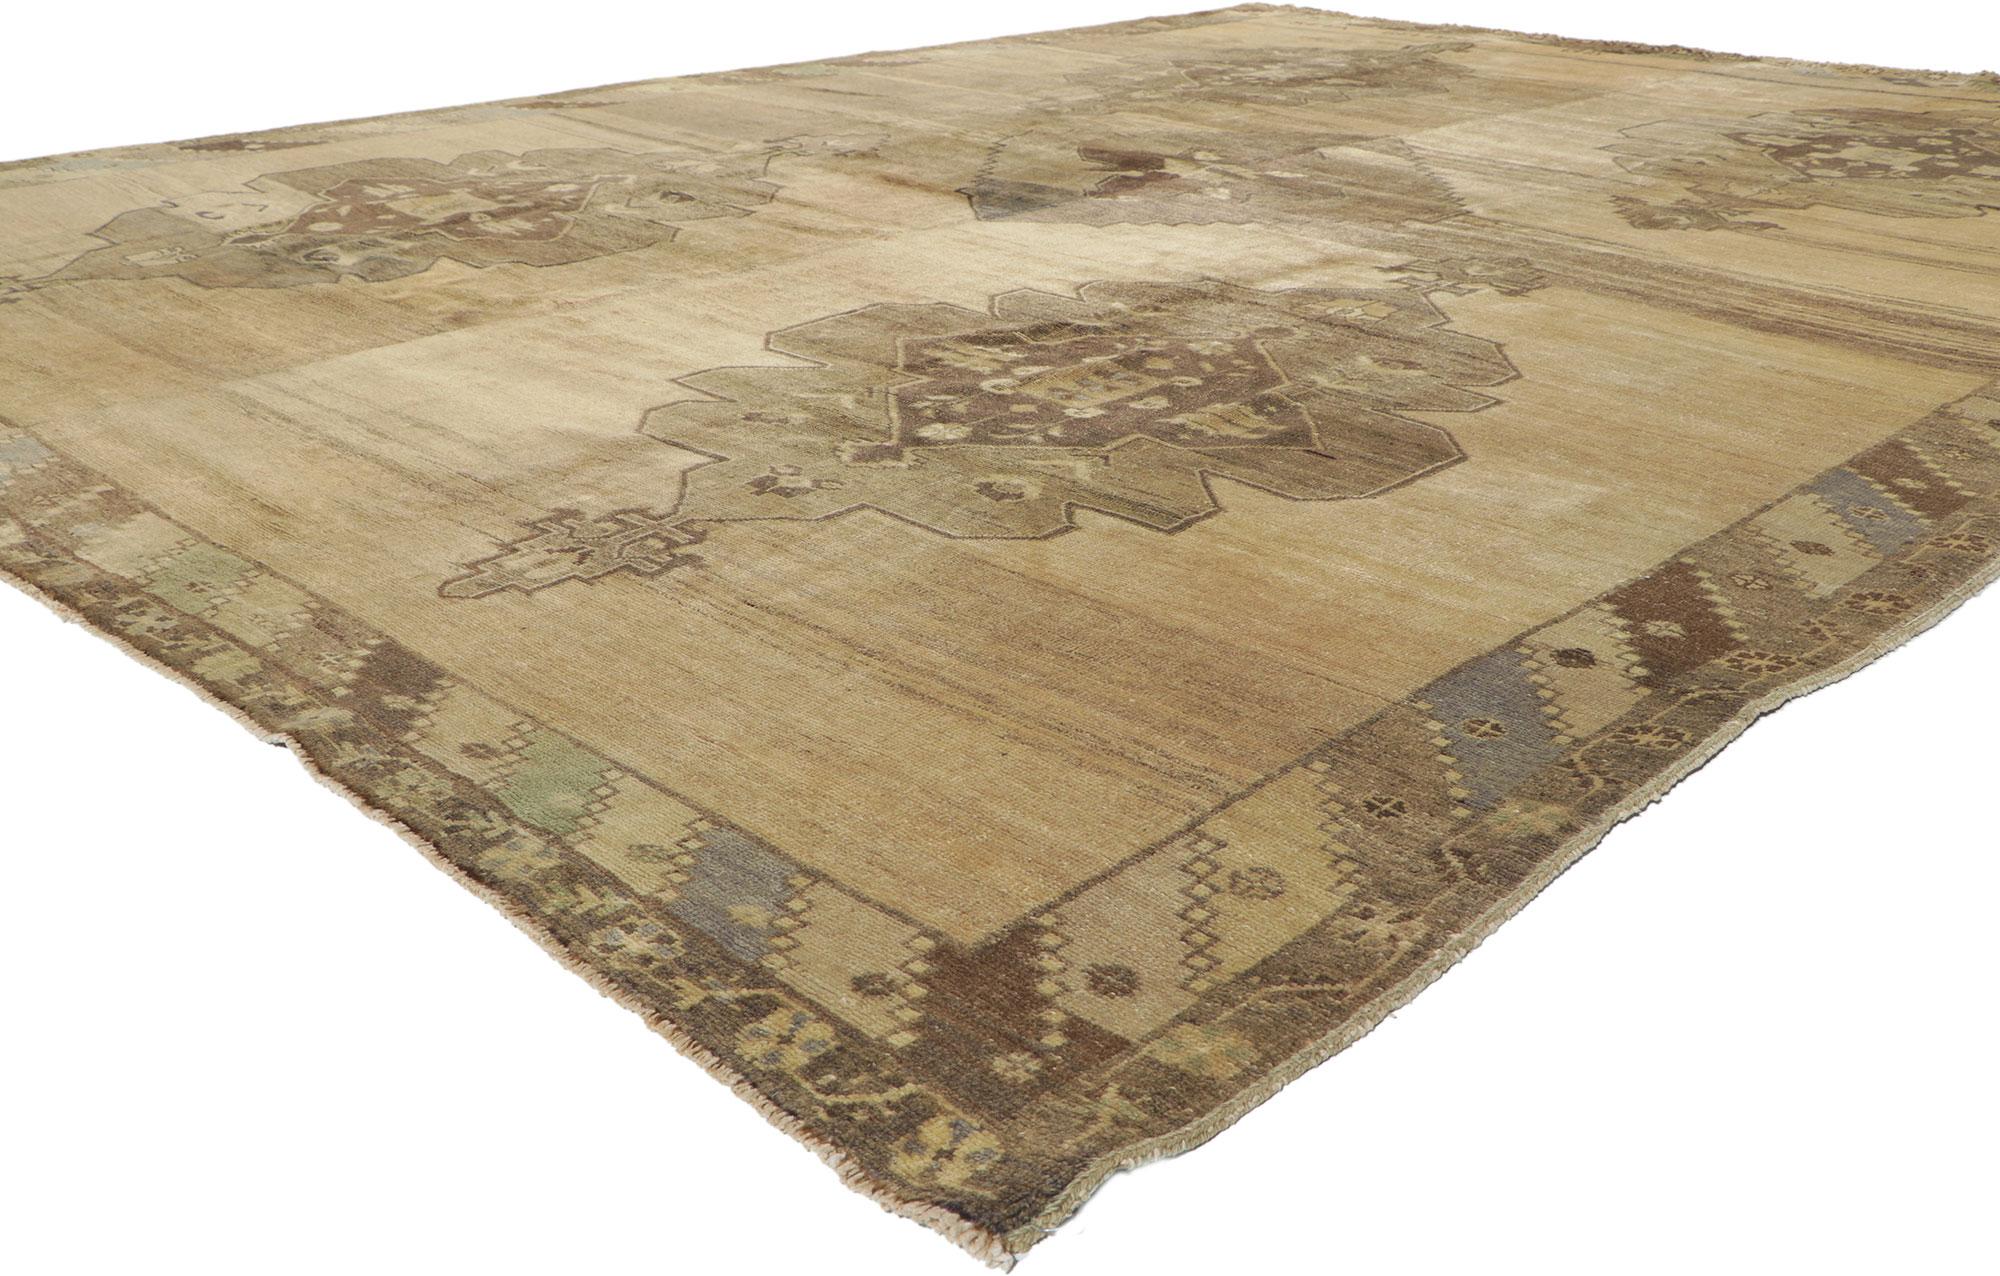 51369 Vintage Turkish Kars Rug with Mid-Century Modern Style and Warm Neutral Colors 09'09 x 12'06. Effortless beauty and simplicity meet soft, bespoke vibes with Mid-Century Modern style in this hand-knotted wool vintage Turkish Kars rug. The